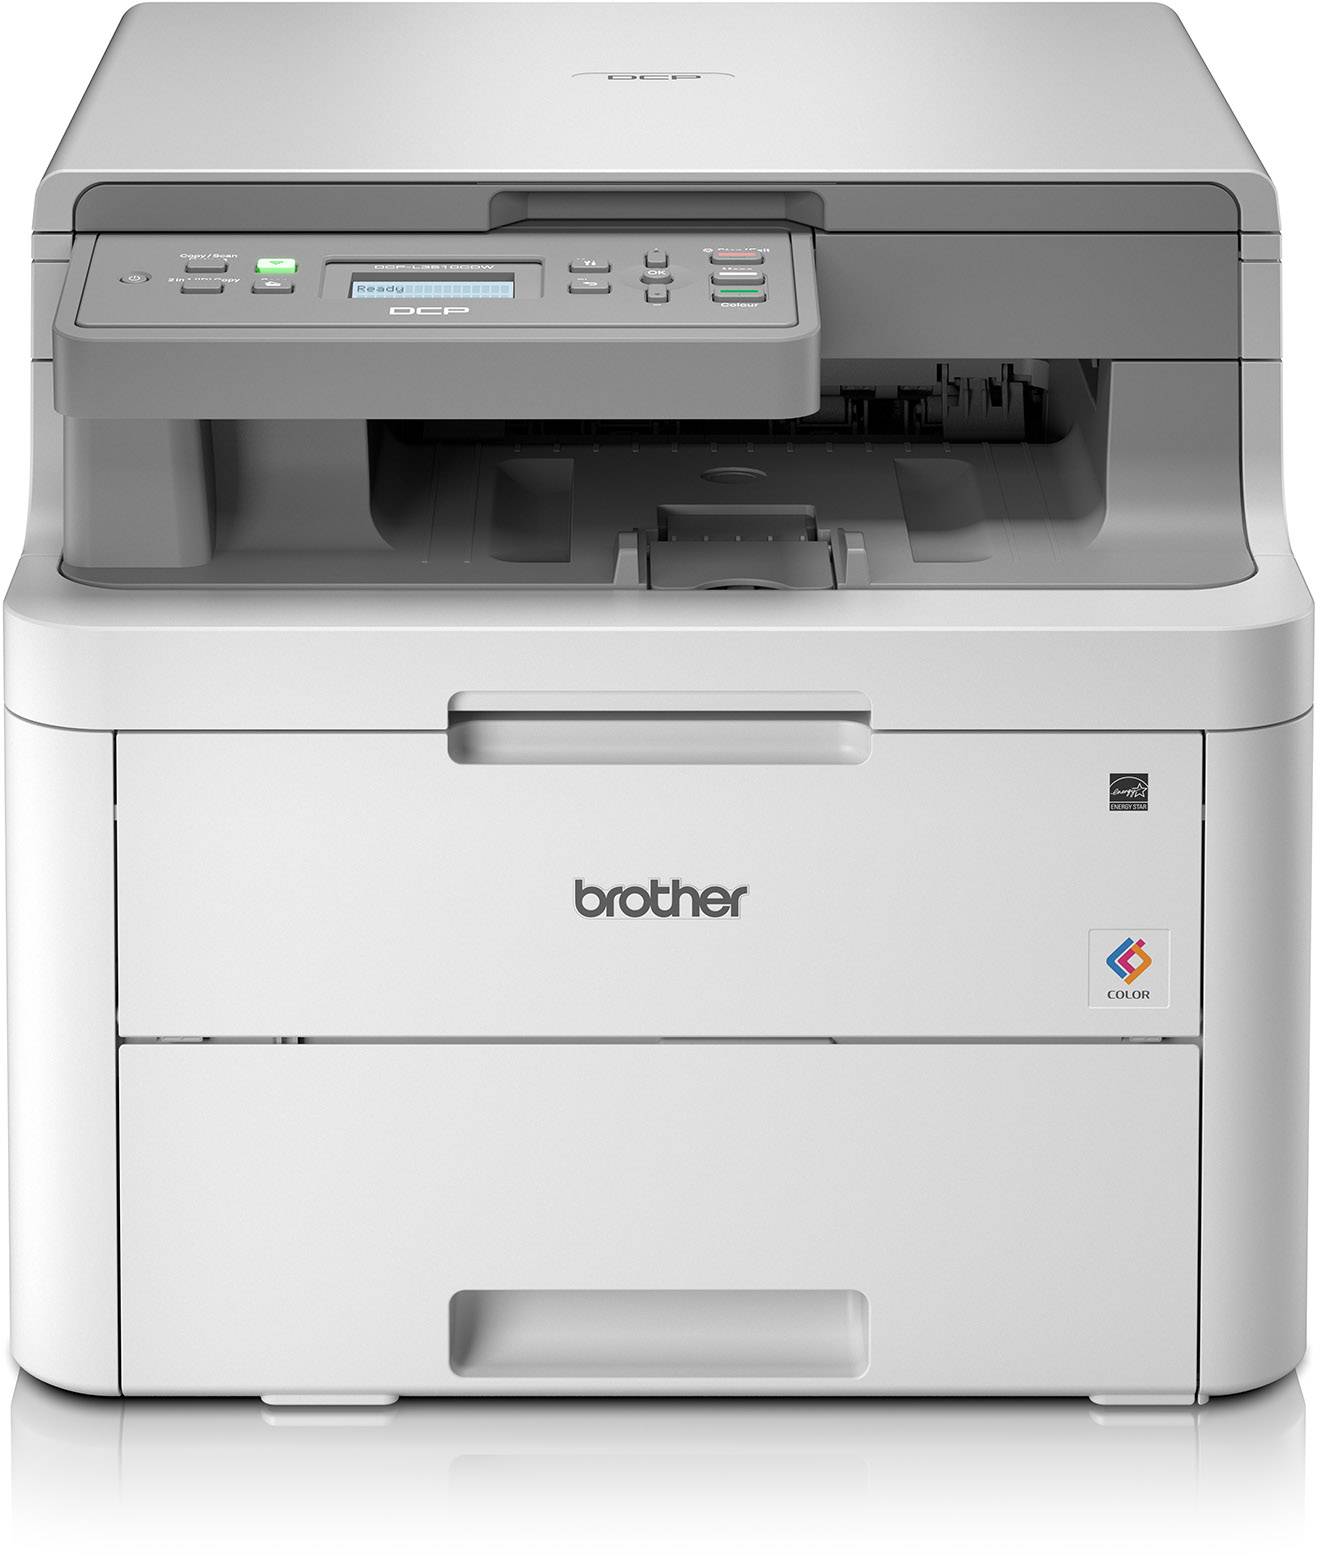 Brother DCPL3510CDW Farb LED Multifunktionsdrucker A4